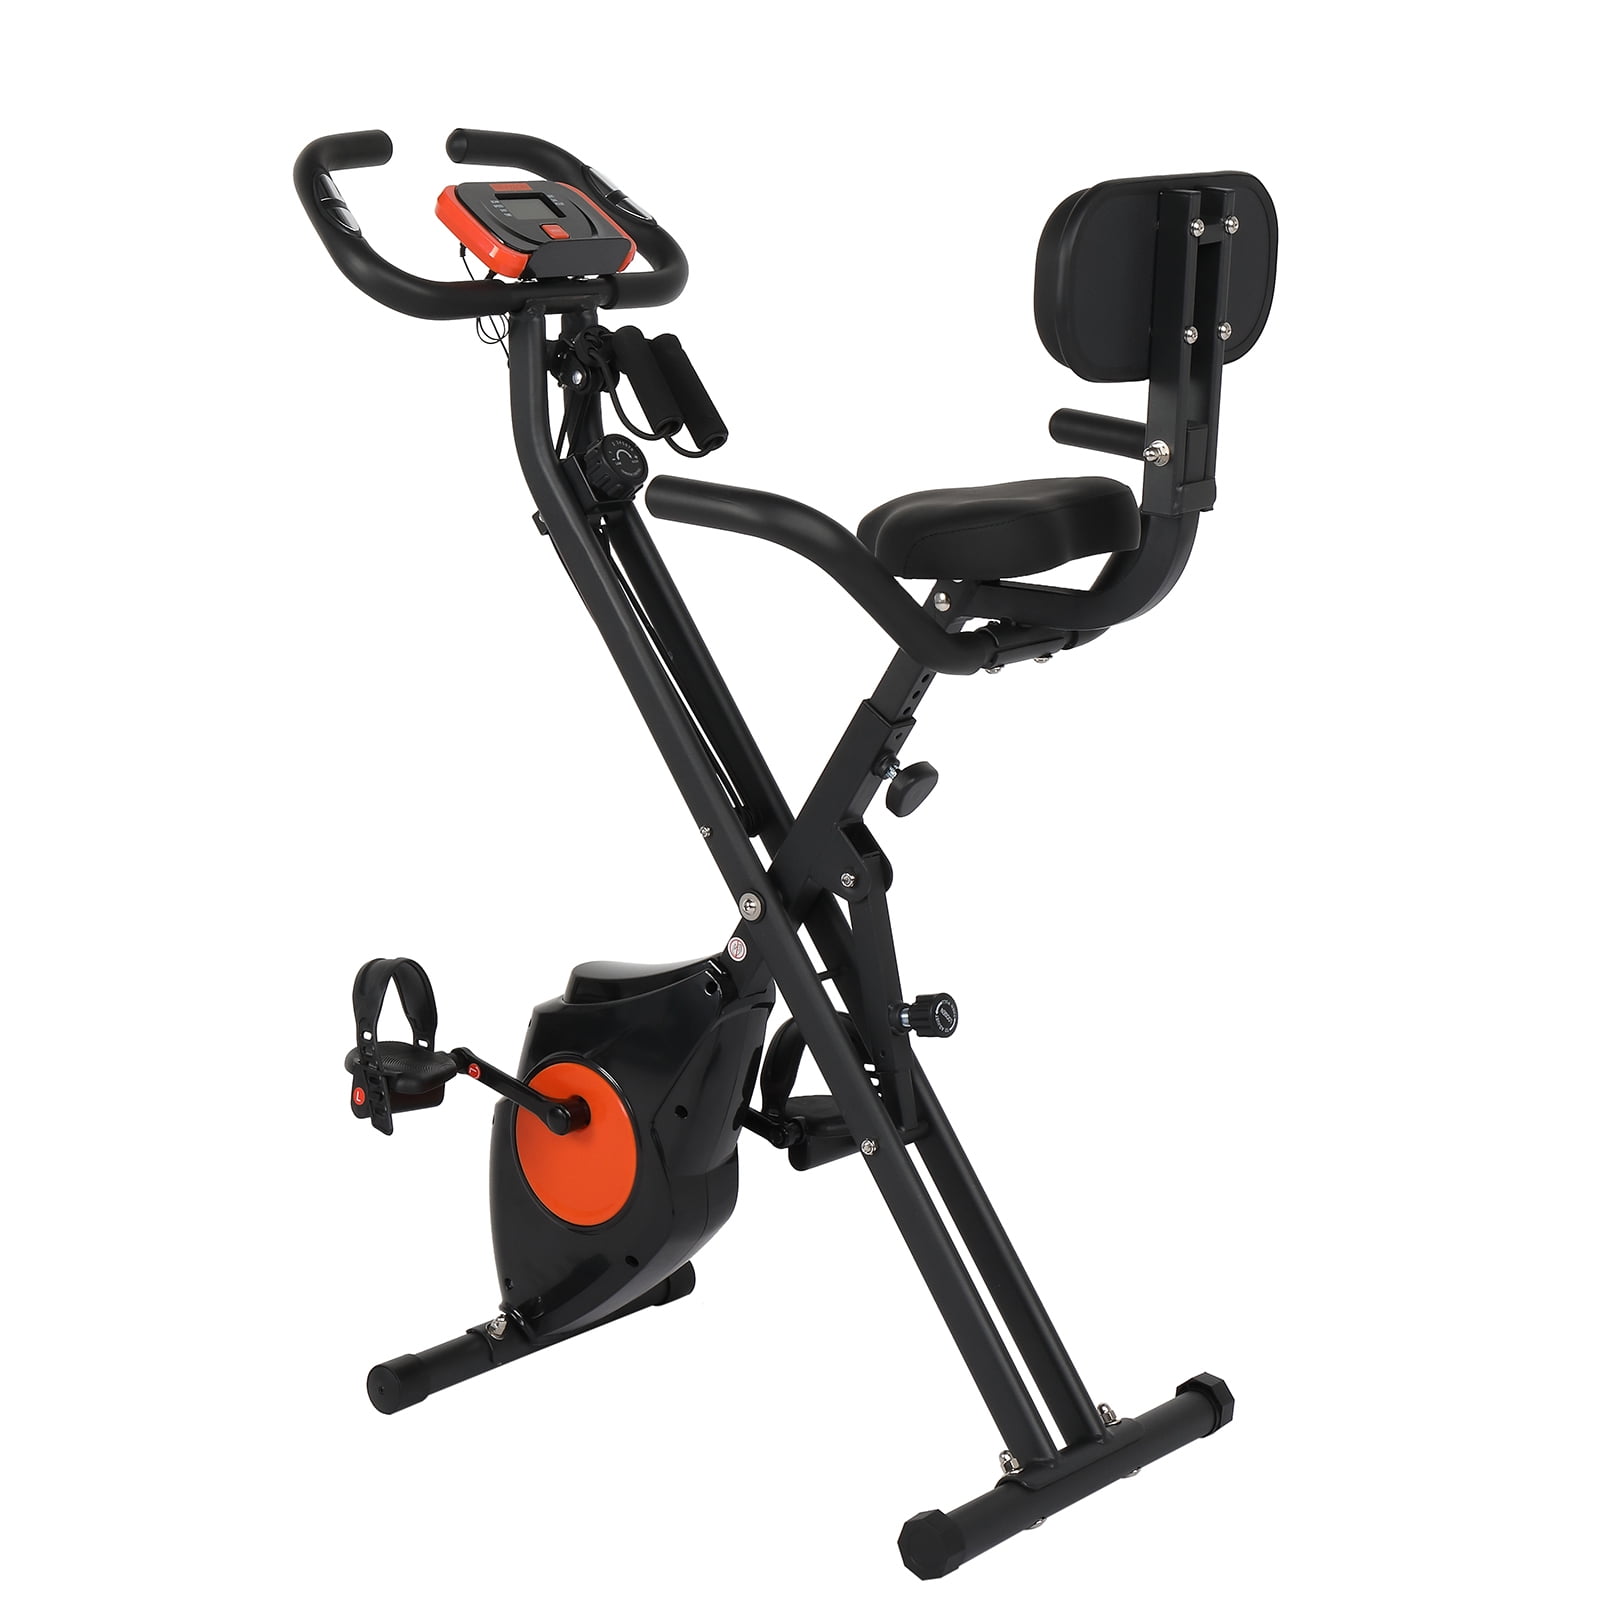 Details about   New Portable Home Travel Pedal Pedal Exercise Exercise Bike Arm and Leg Slimming 